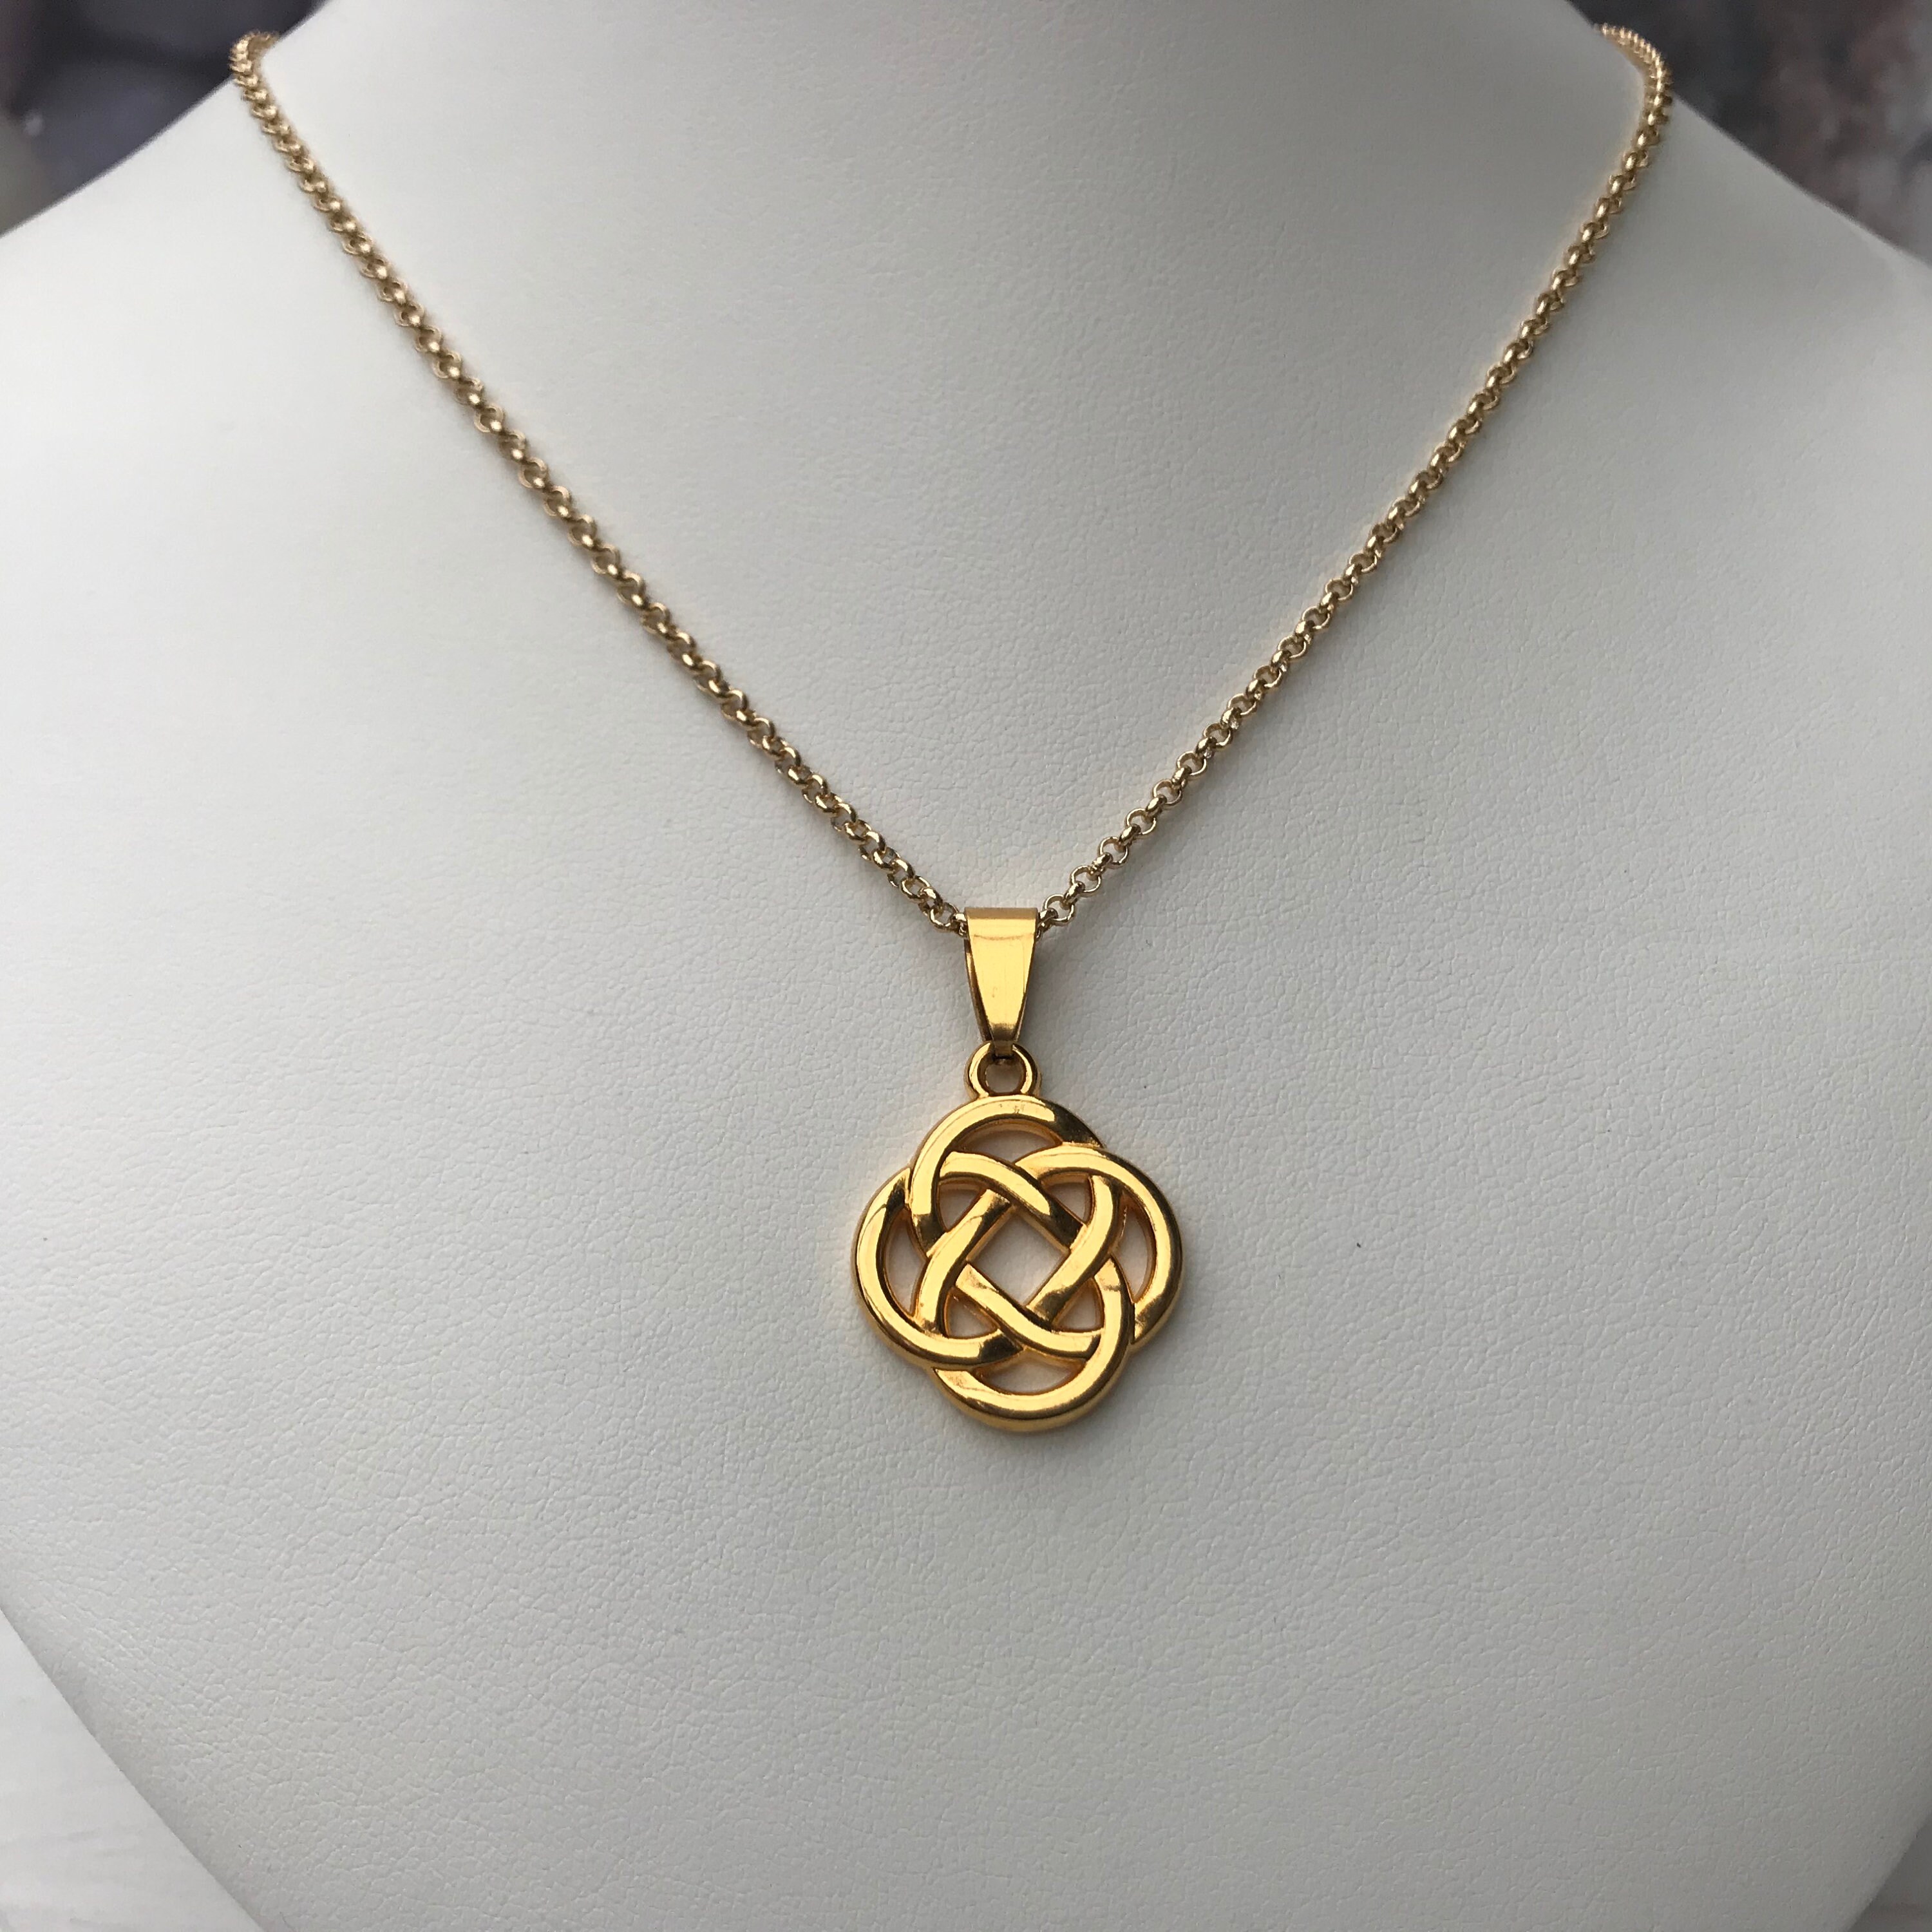 CELTIC KNOT plain stainless steel chain with pendant in gold | Etsy